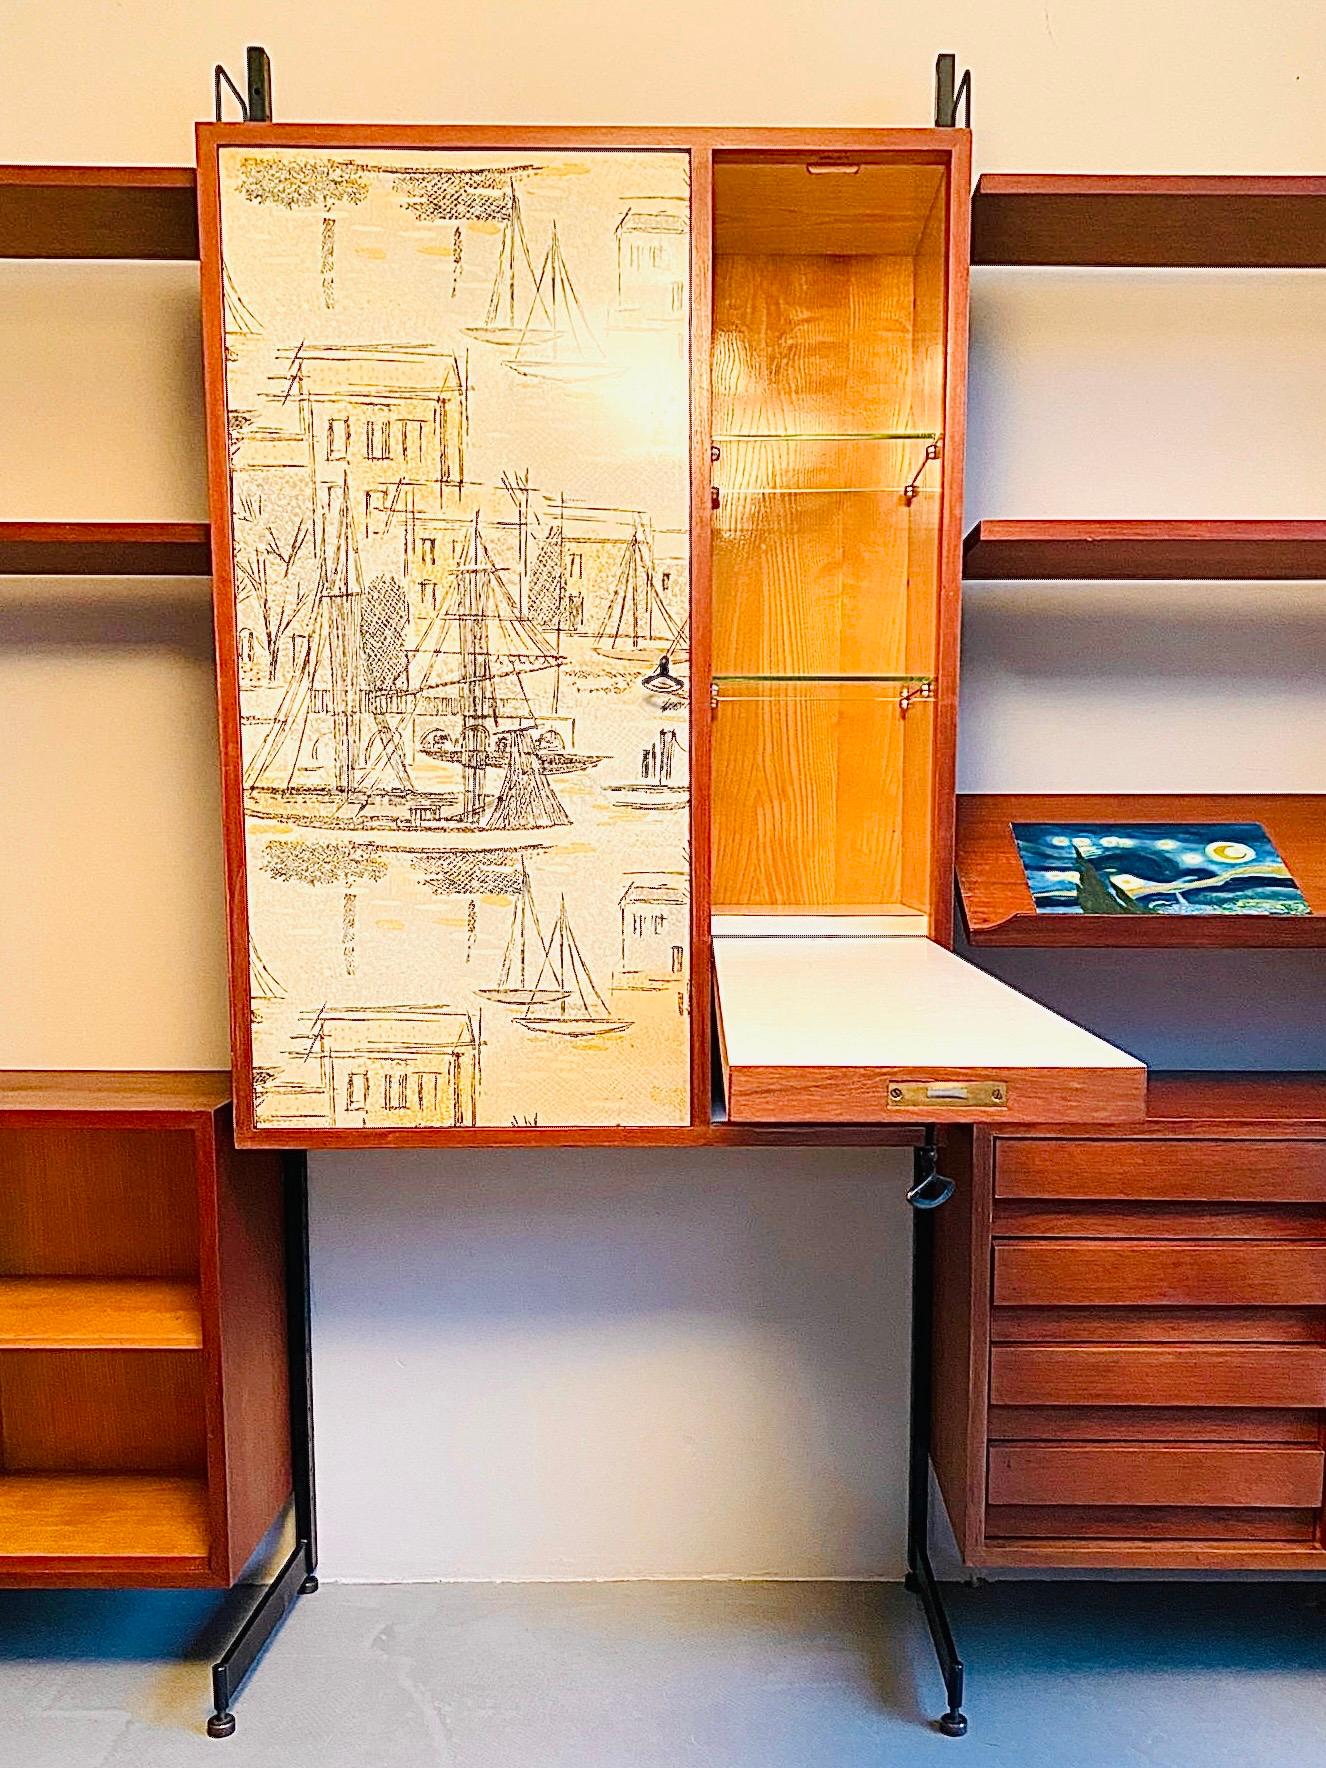 Mid-20th Century Multi Storage Functional Italian Shelving System Room Divider with Art Work For Sale